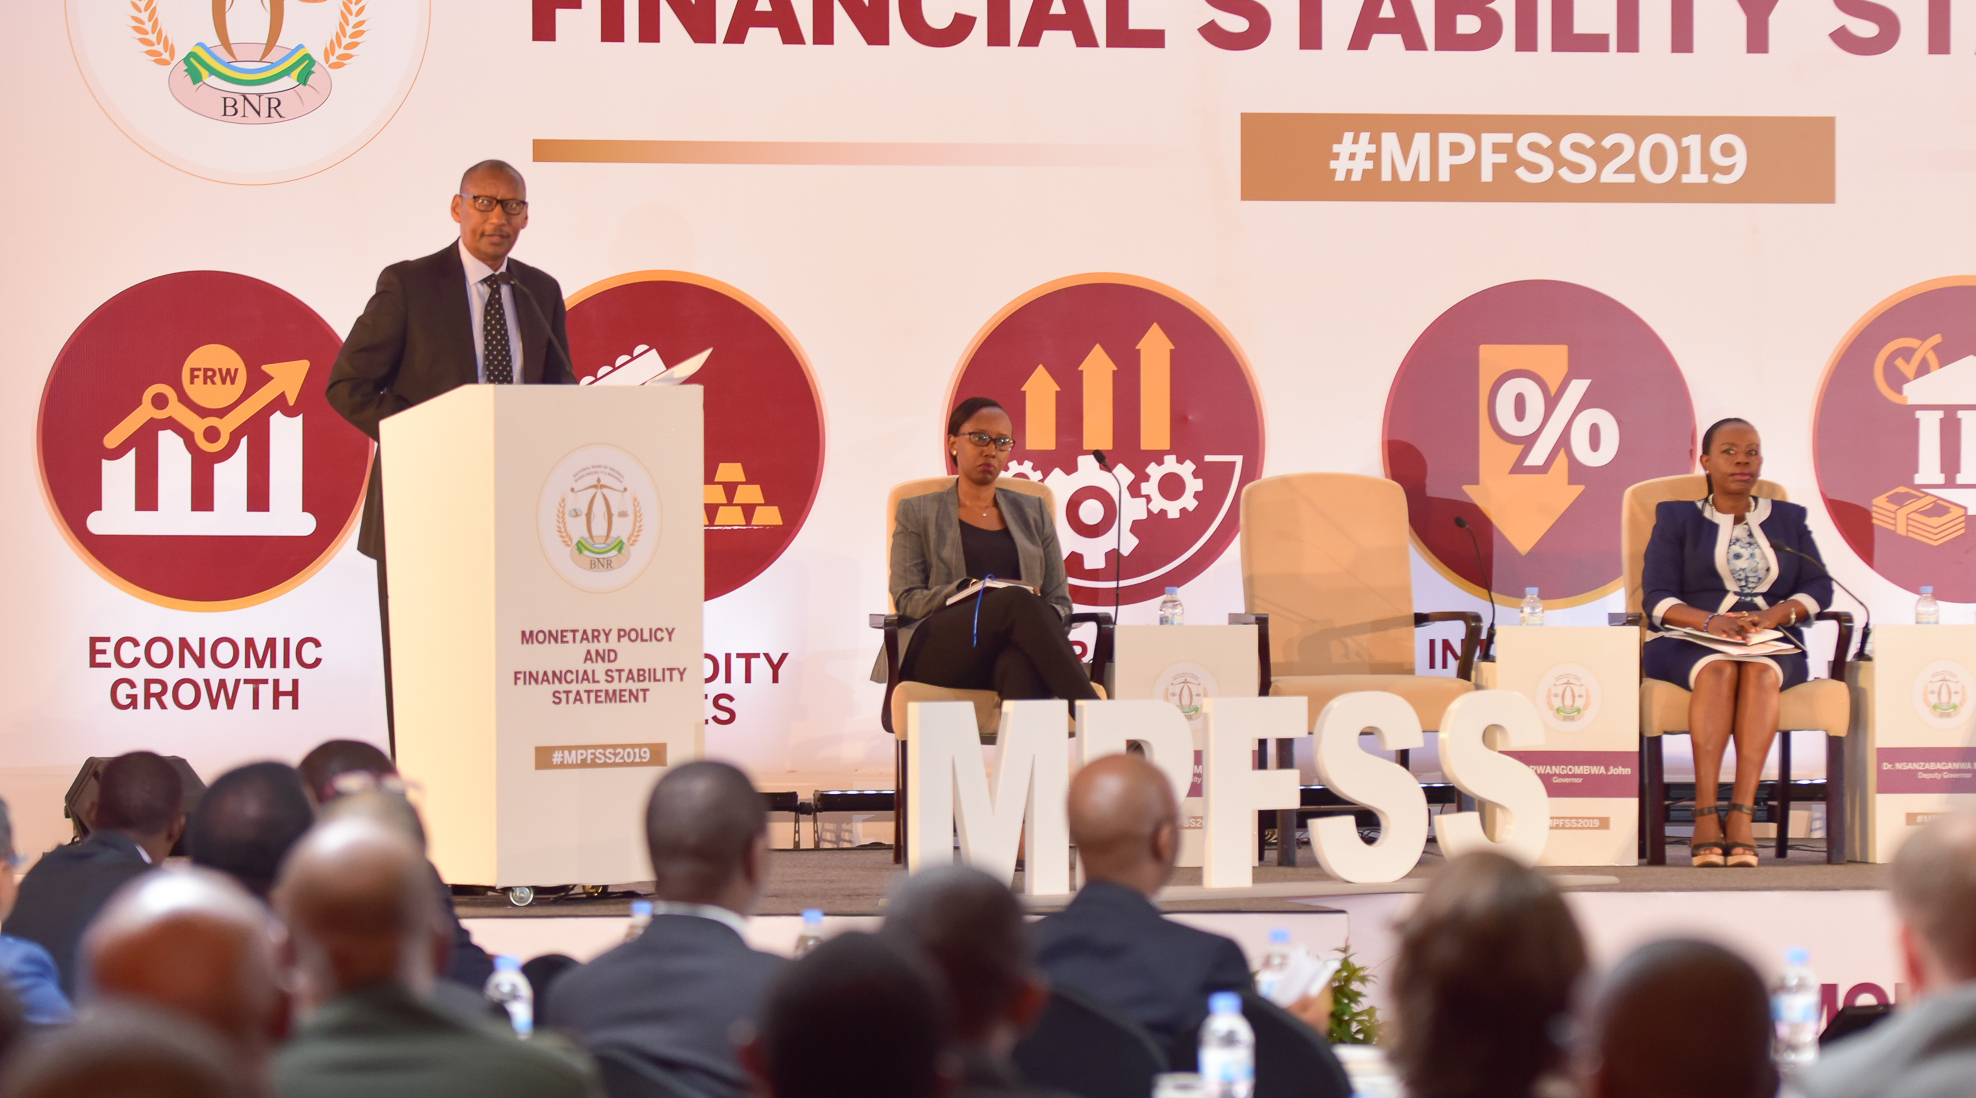 Central Bank Governor John Rwangombwa (left) speaks at the meeting, as Peace Uwase Masozera, Executive Director Financial Stability, and Vice-Governor Monique Nsanzabaganwa look on in Kigali yesterday. / Courtesy